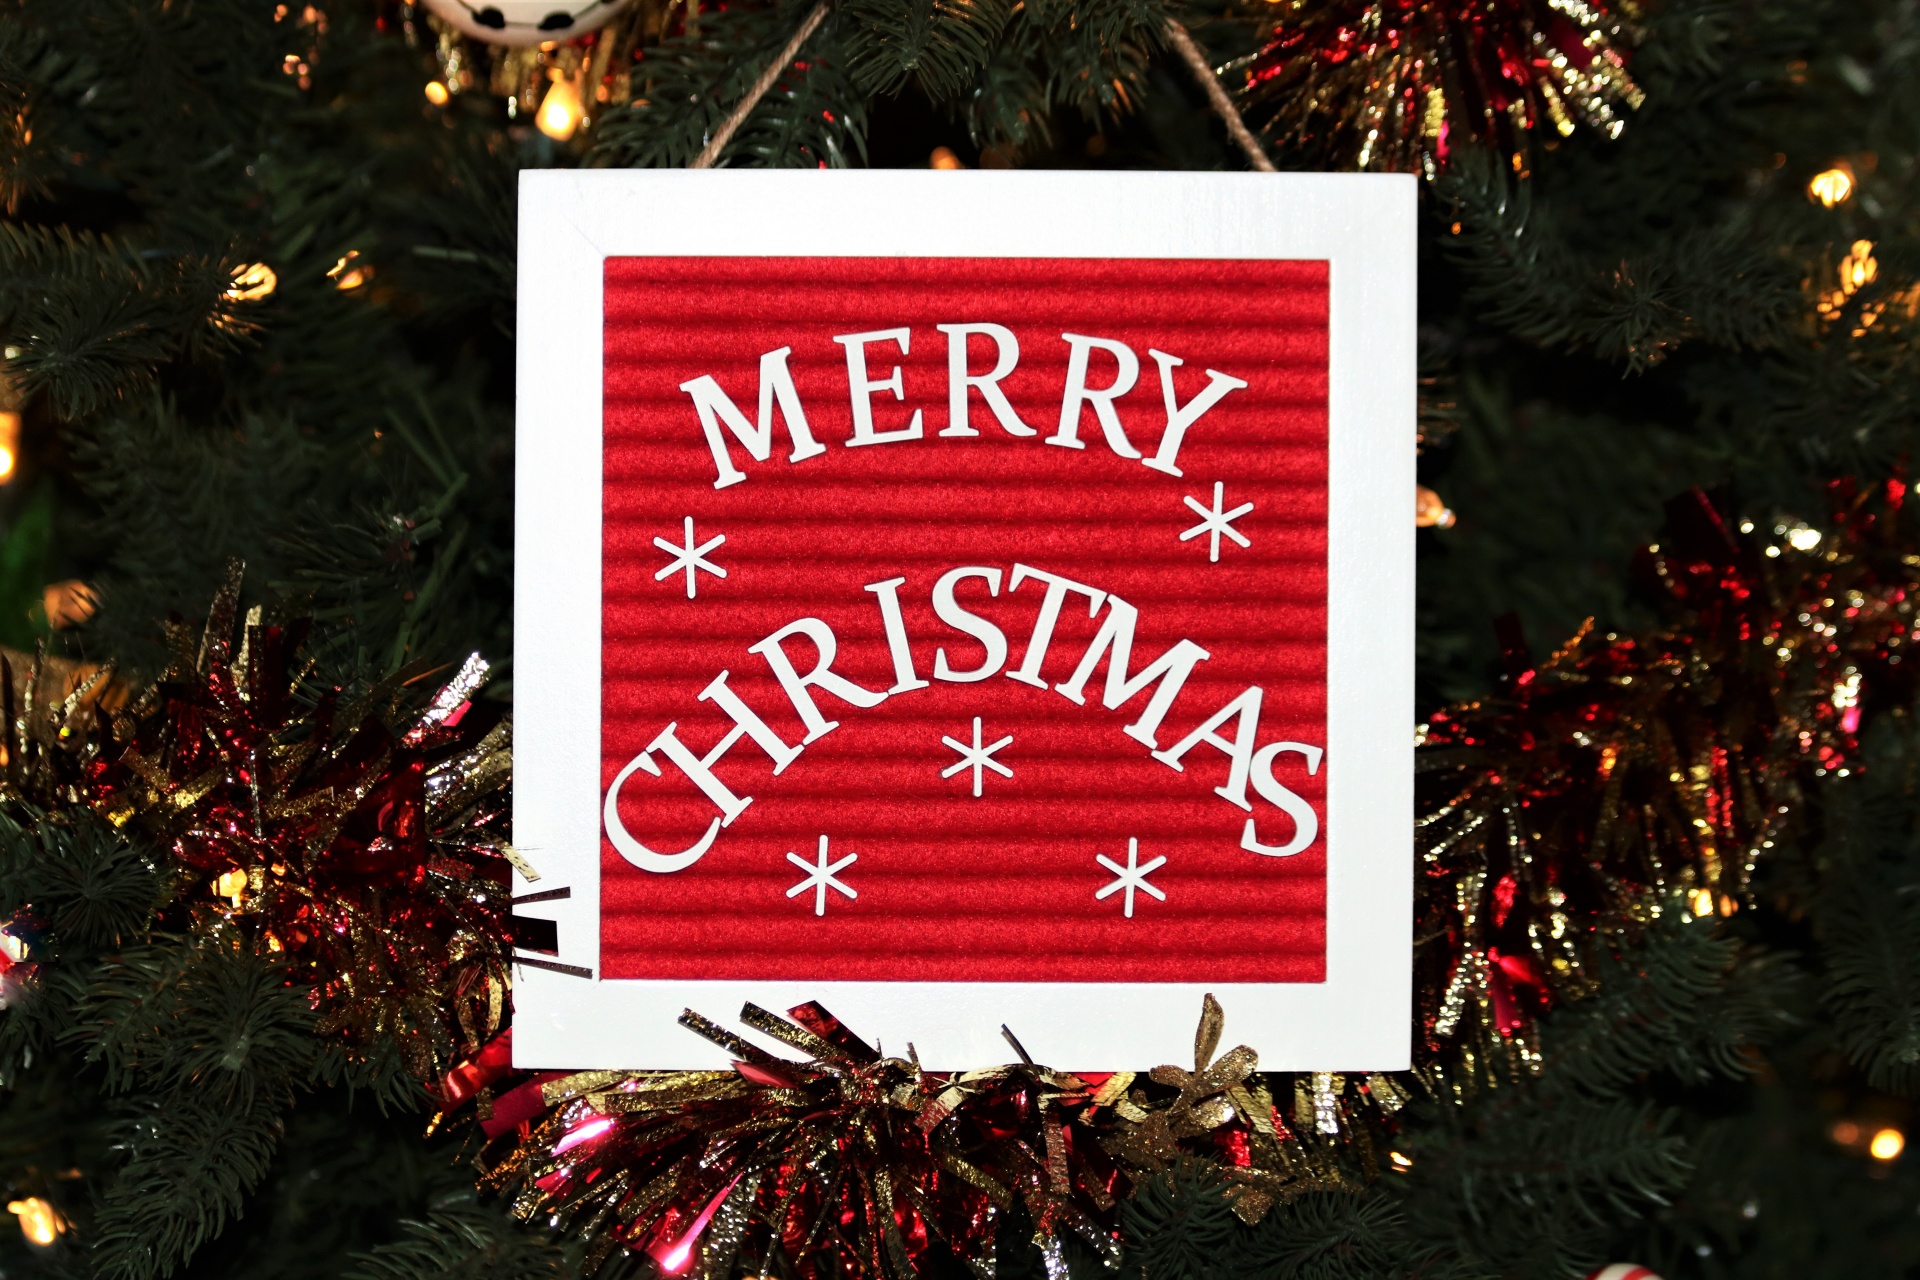 Merry Christmas in white text, with snow flakes, on a red background and white frame, hanging on Christmas tree with Christmas lights in the background.